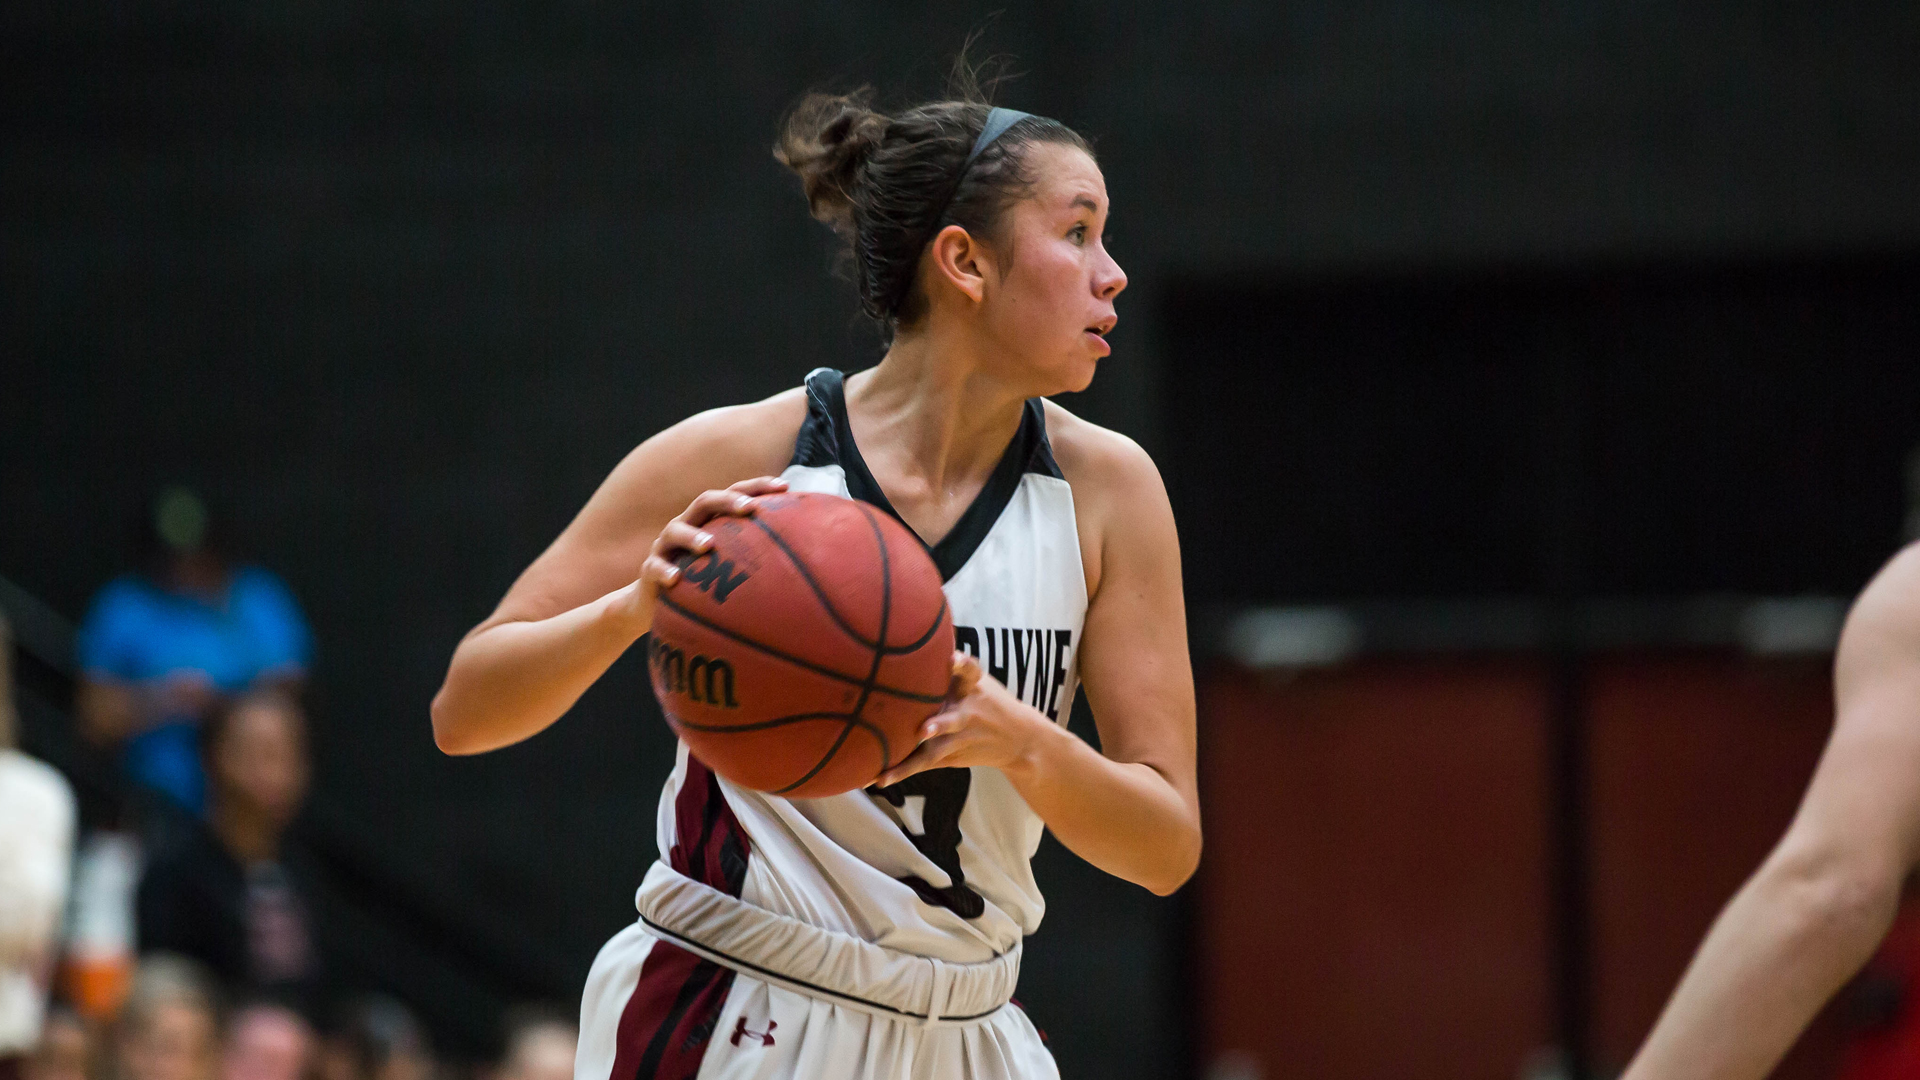 Kendall Toineeta (Eastern Cherokee) led all scorers and repeated her season-high in scoring with 25 points